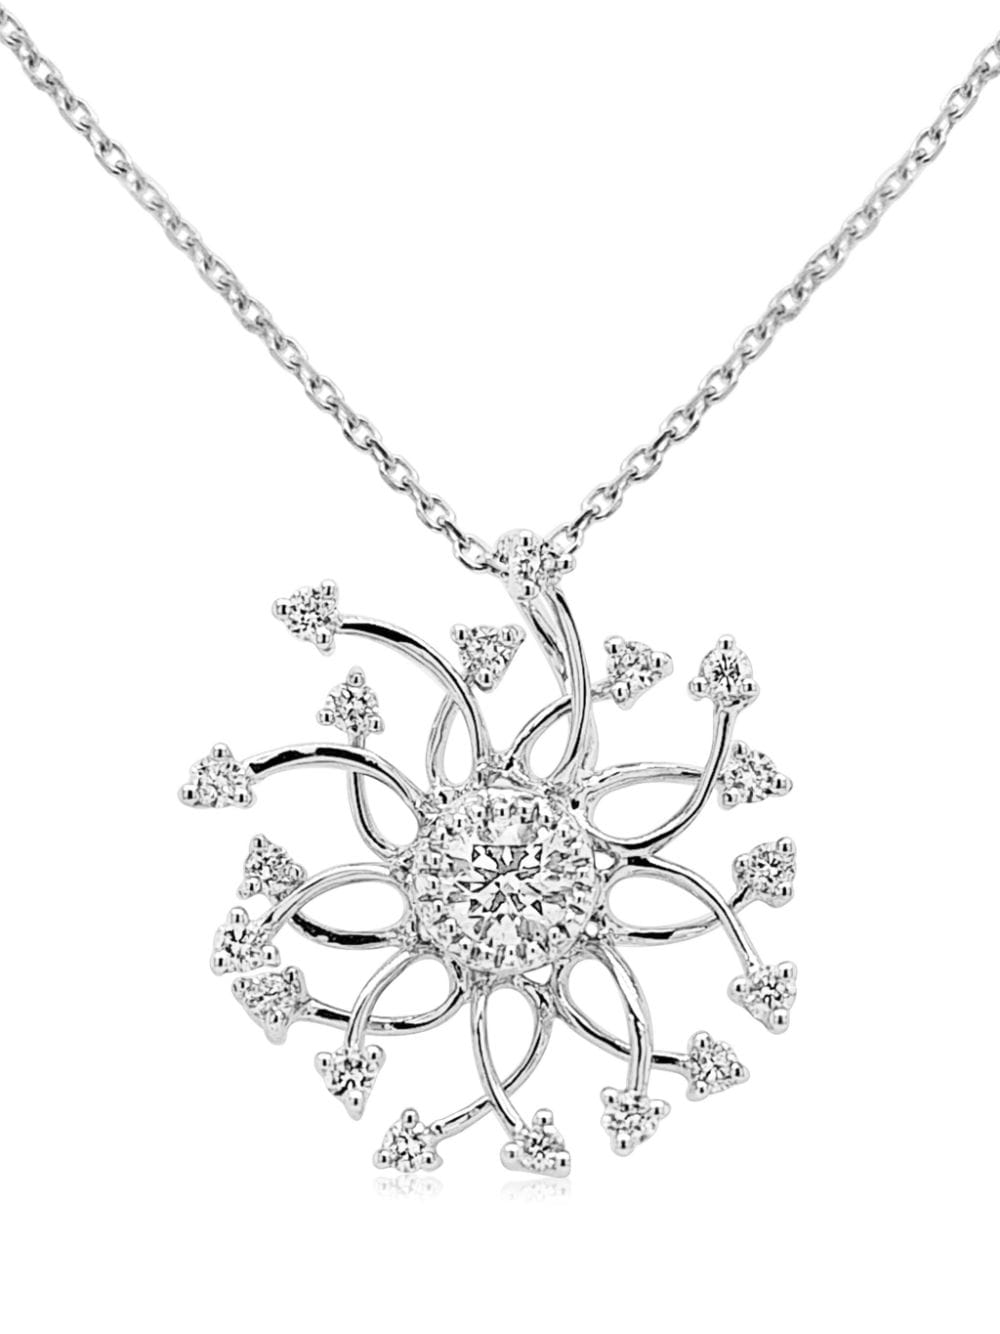 Hyt Jewelry 18kt White Gold Diamond Pendant Necklace In Silver